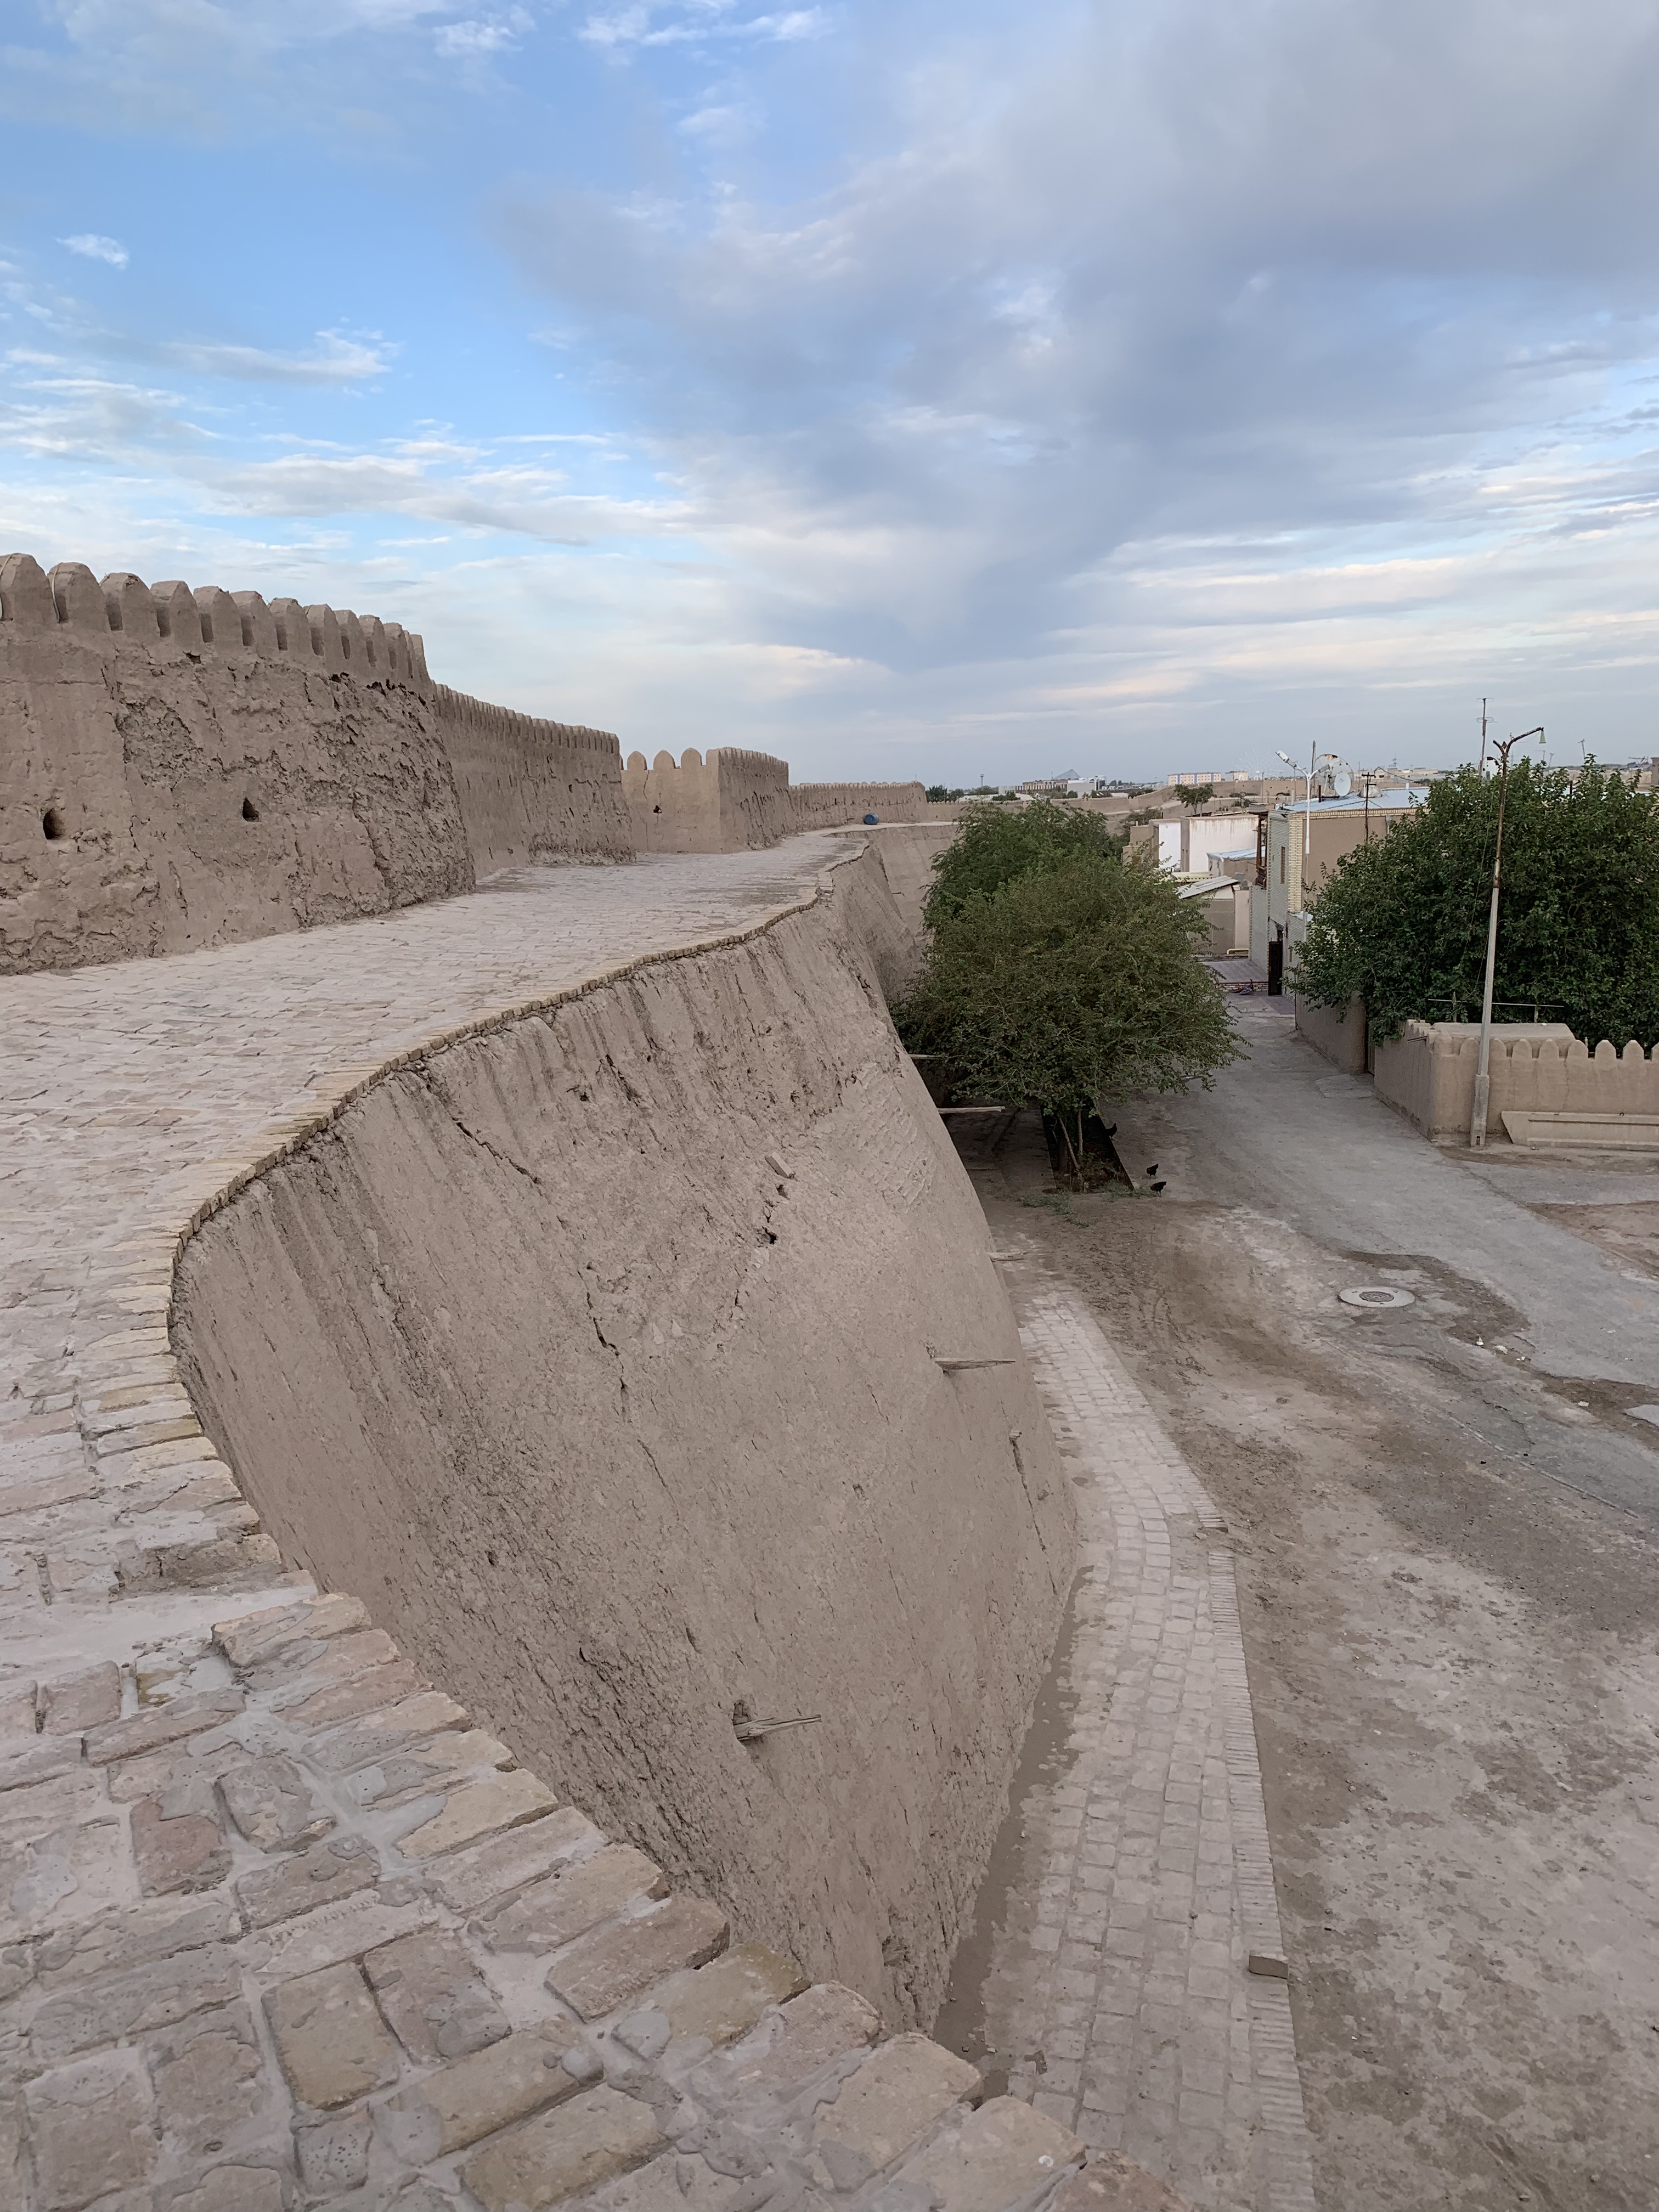 Atop the inner city walls